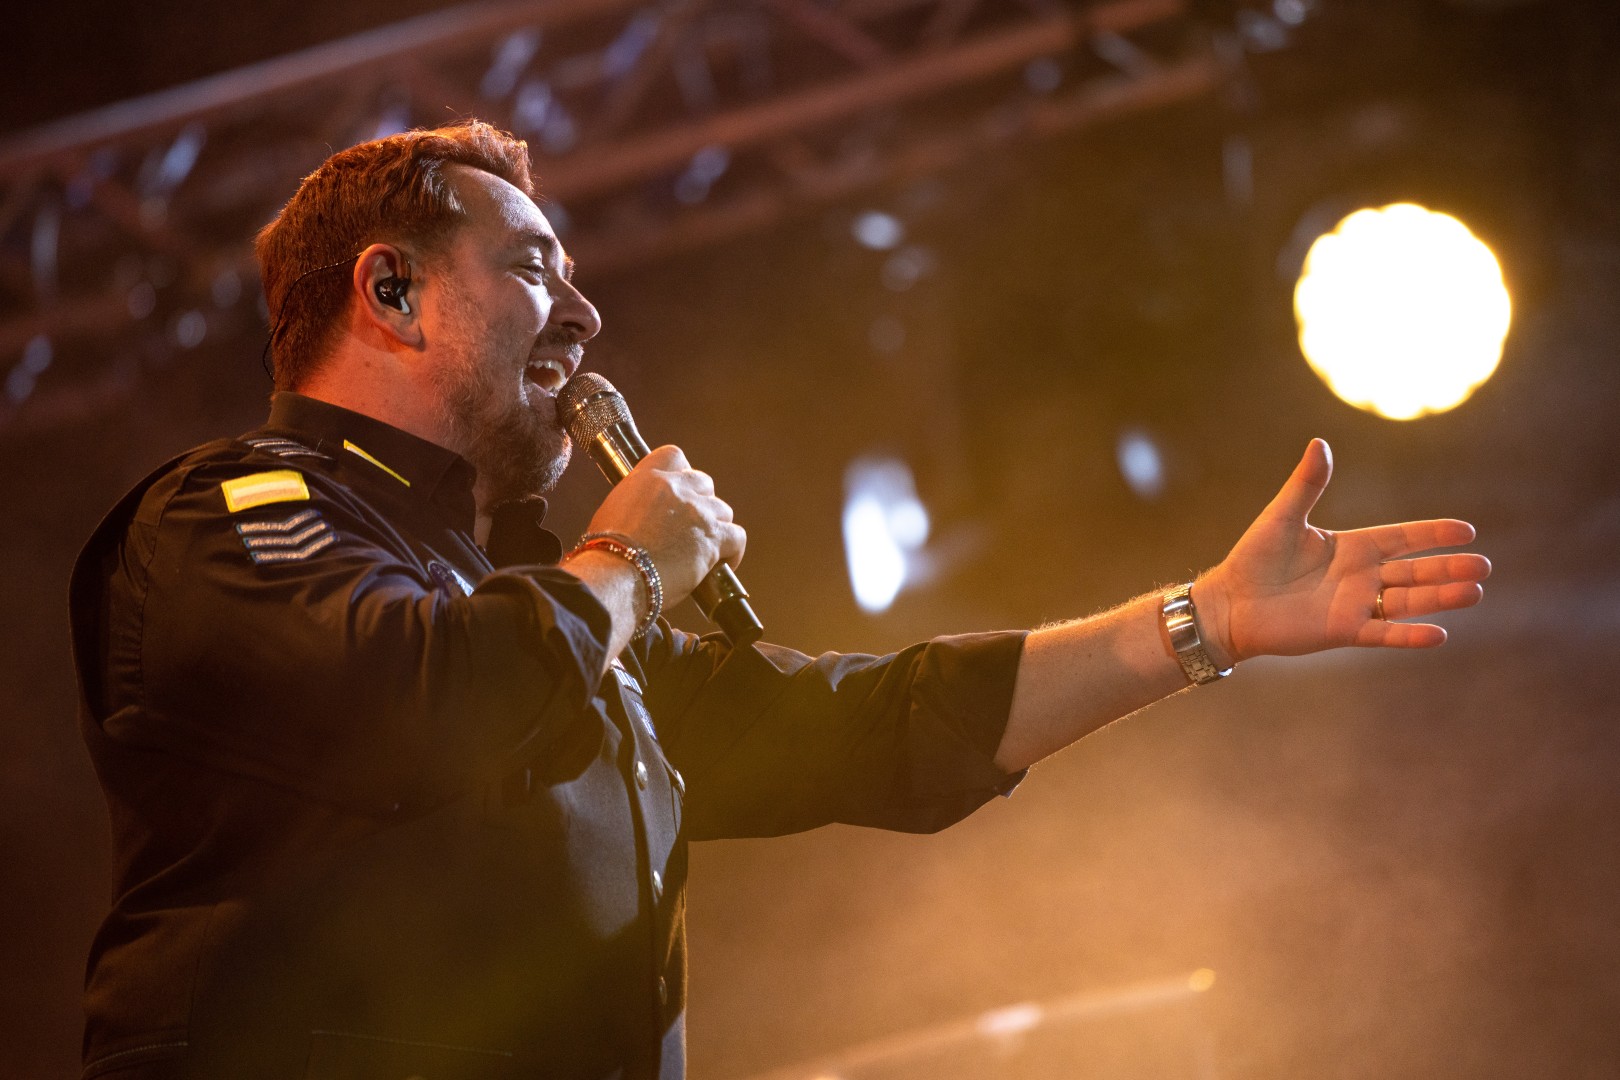 Horia Brenciu at National Arena in Bucharest on March 12, 2022 (c5edb2714d)